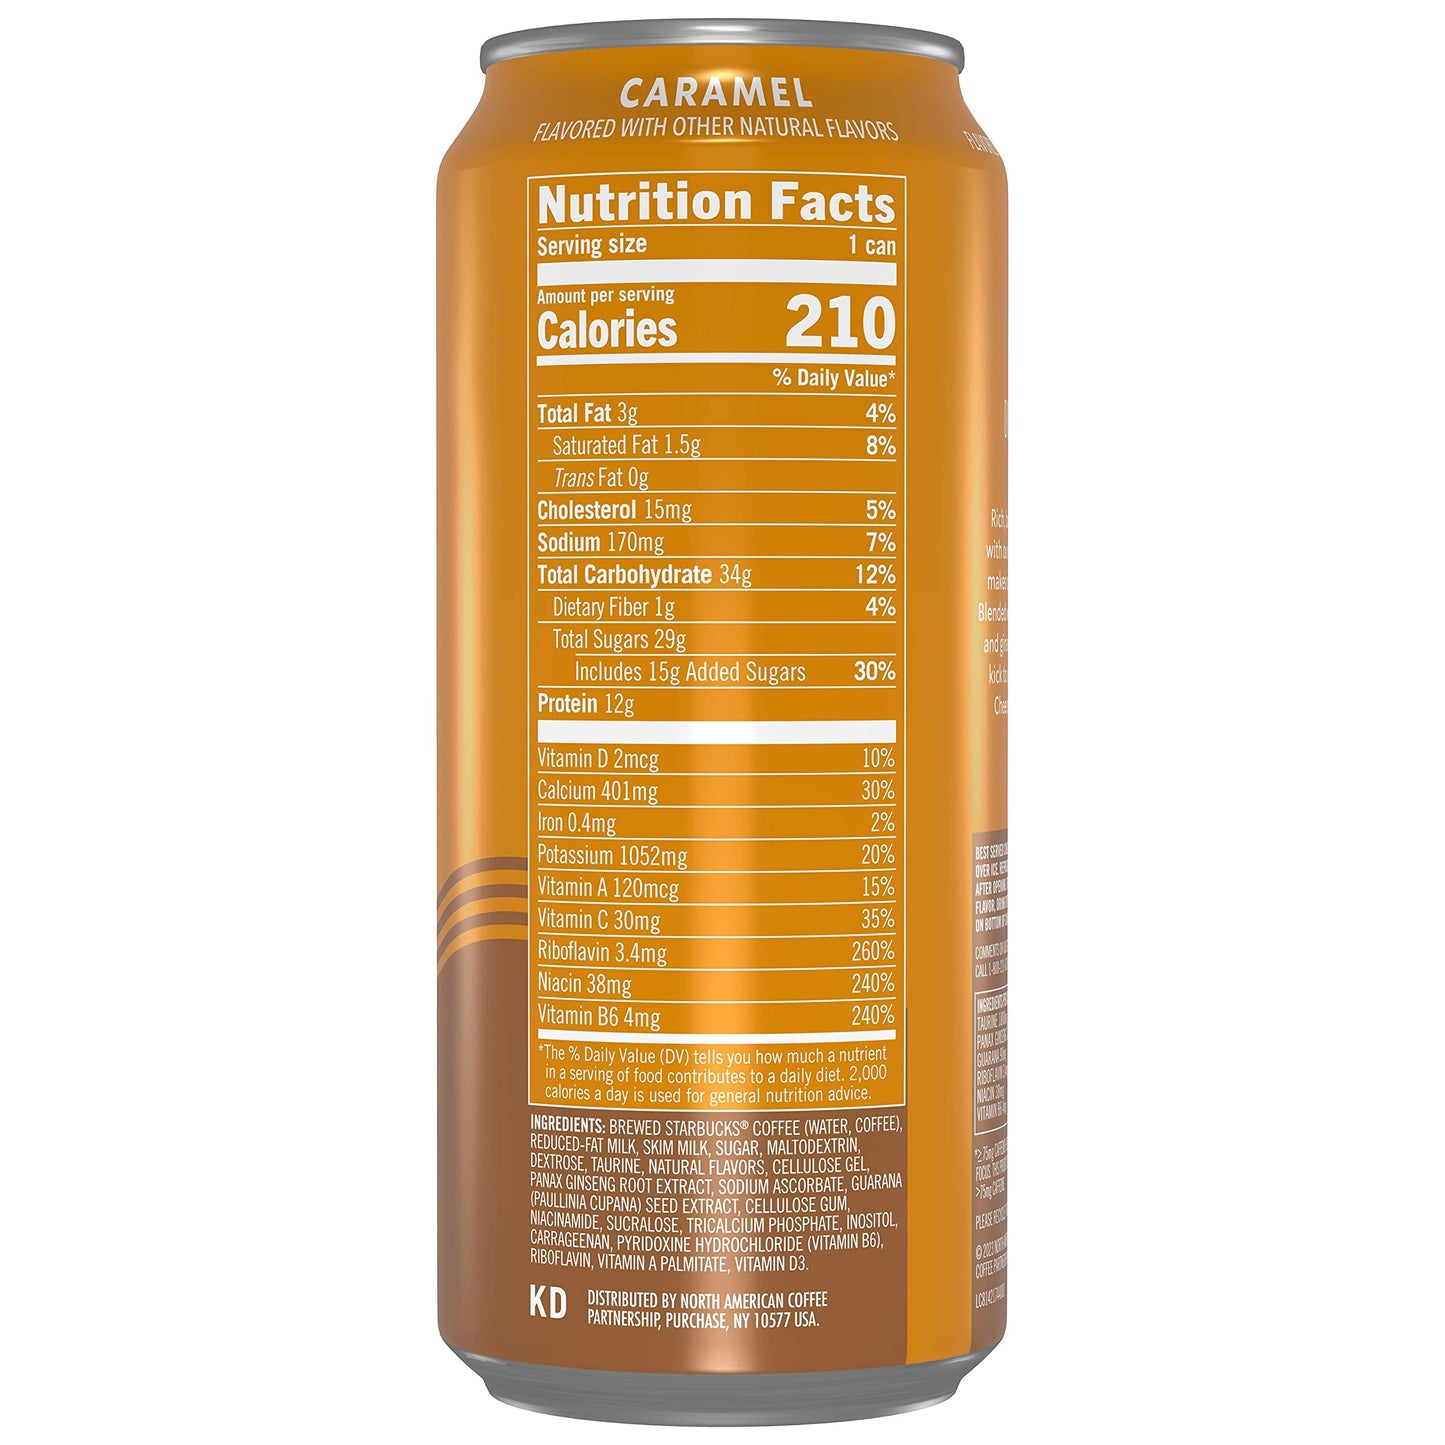 Starbucks Doubleshot Energy Drink Coffee Beverage, Caramel, Iced Coffee, 15 fl oz Cans (12 Pack) (Packaging May Vary)